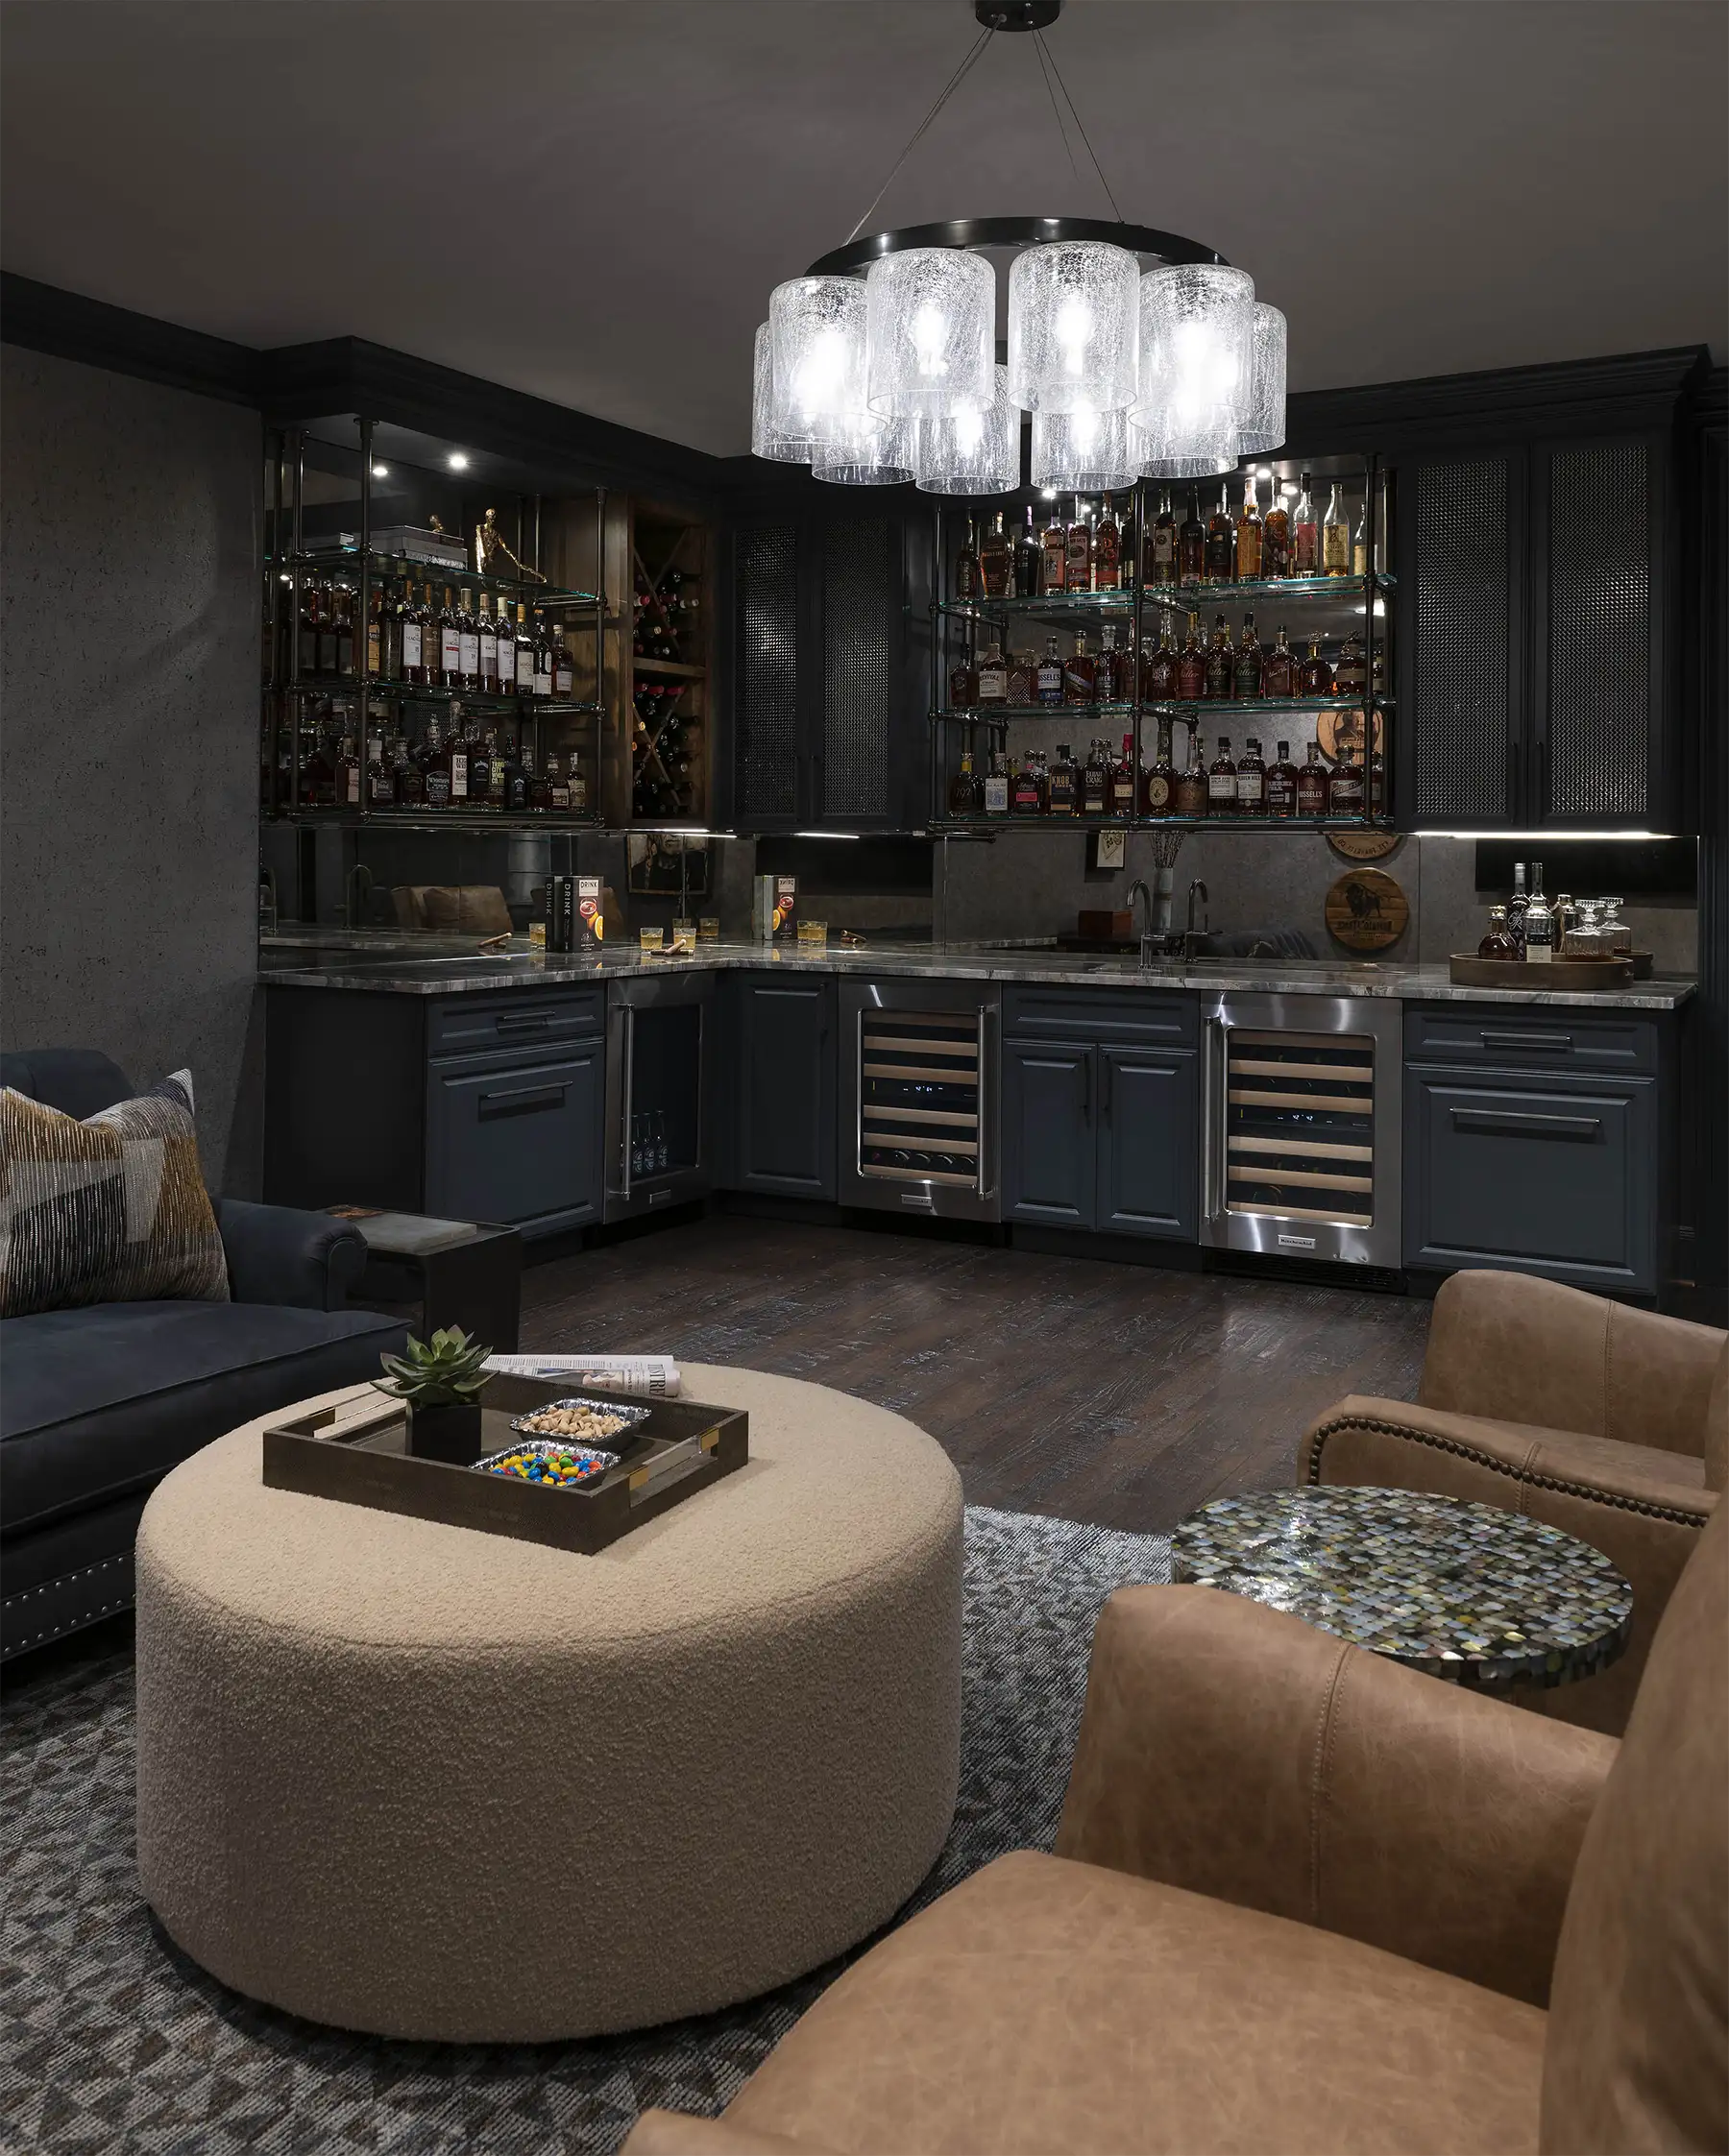 Preston Hollow Bourbon Lounge and Bathrooms Renovation and Furnishing